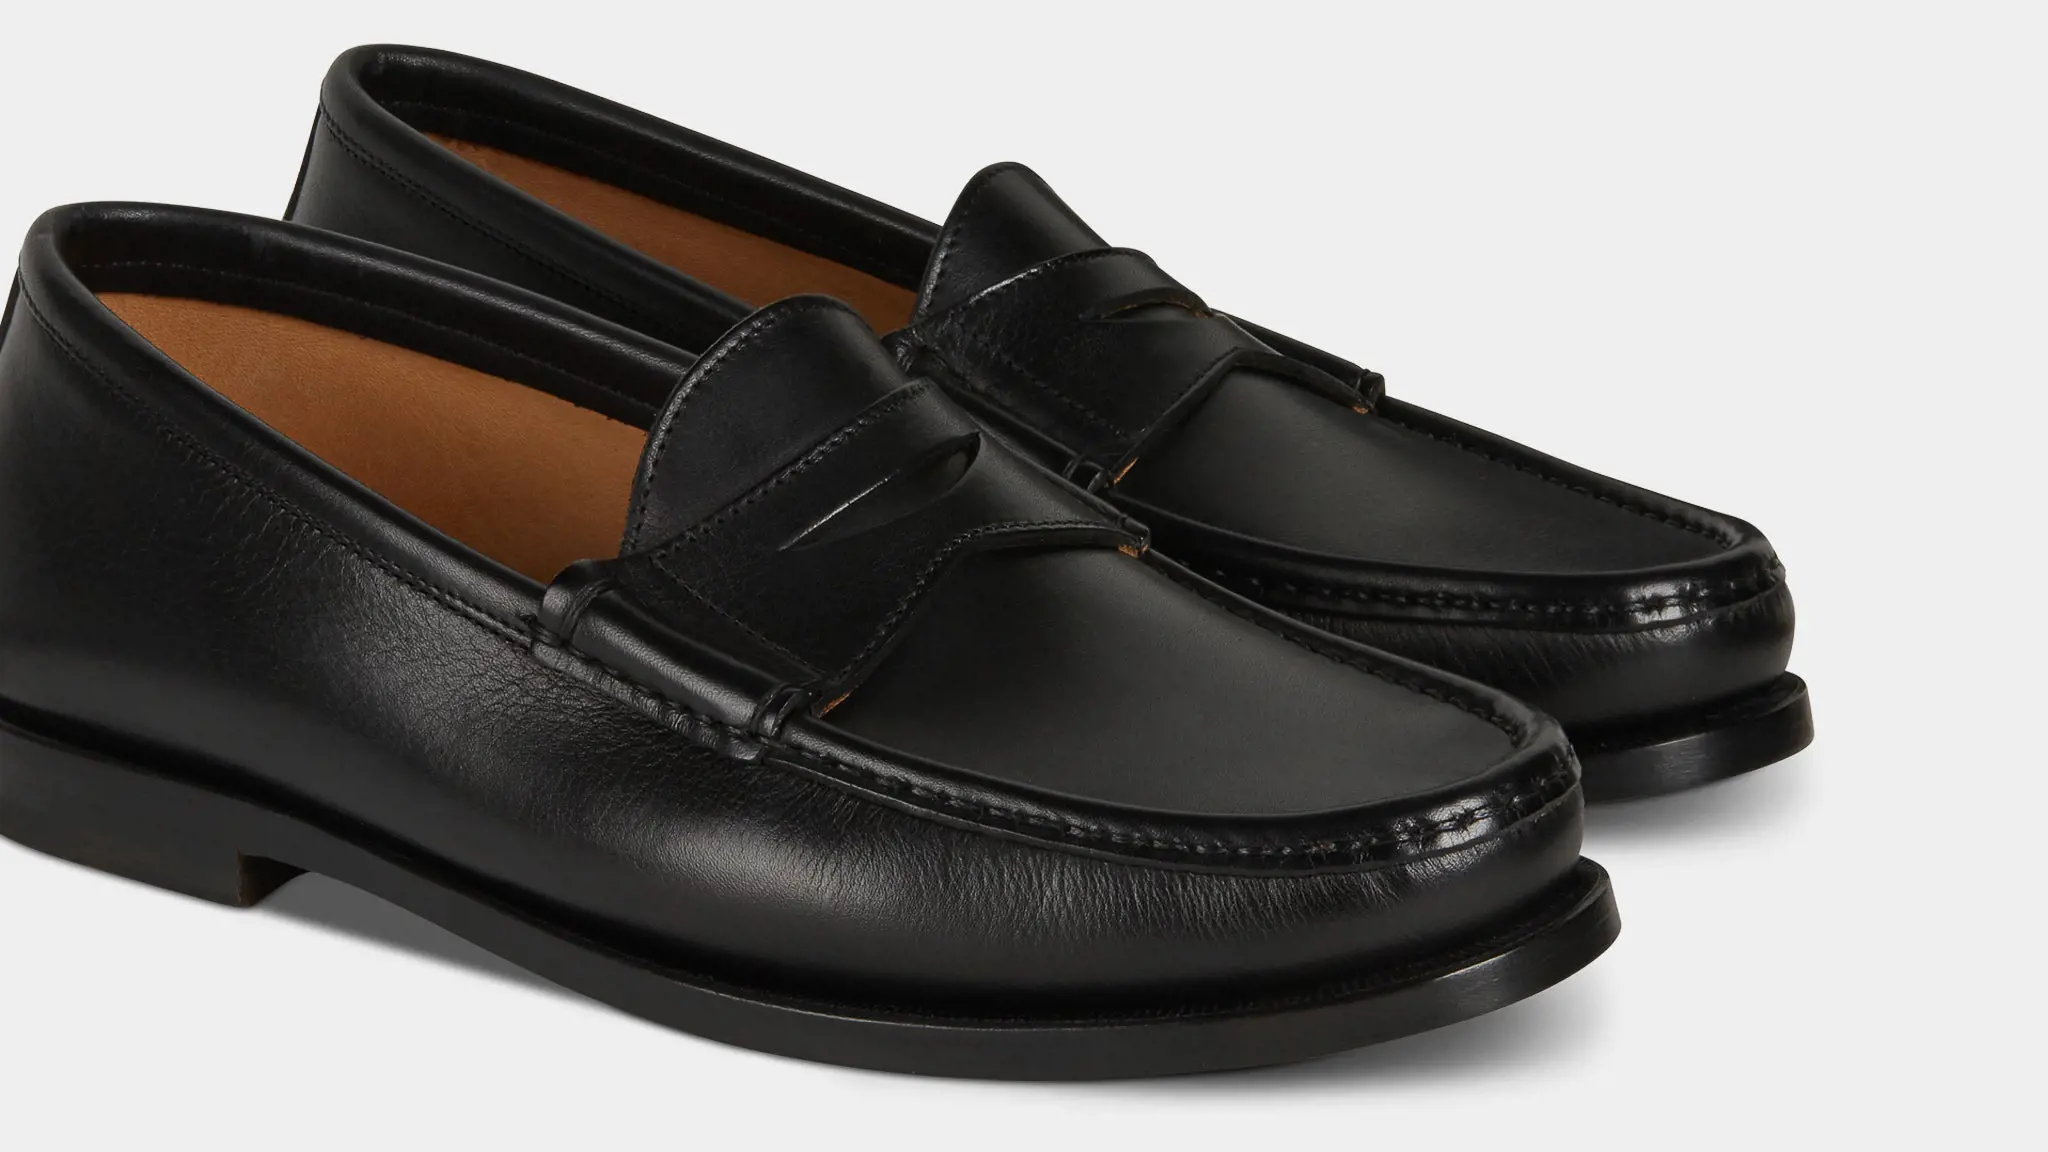 Top Dress Shoes For College Students: Finding The Perfect Pair For ...